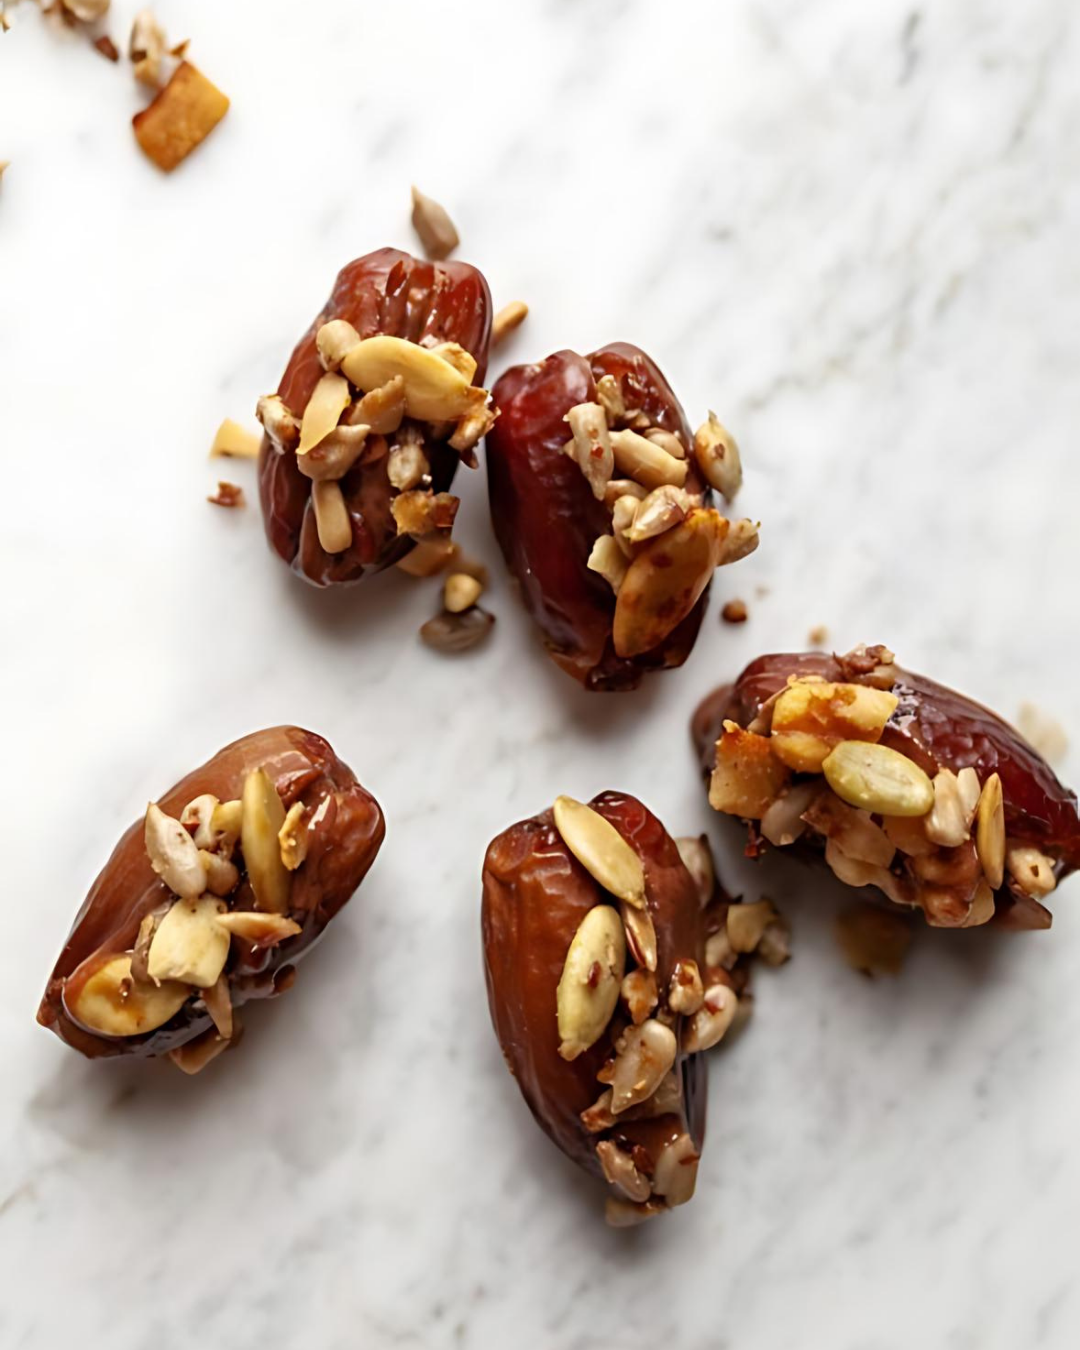 Dates Stuffed with Nut Butter and Granola